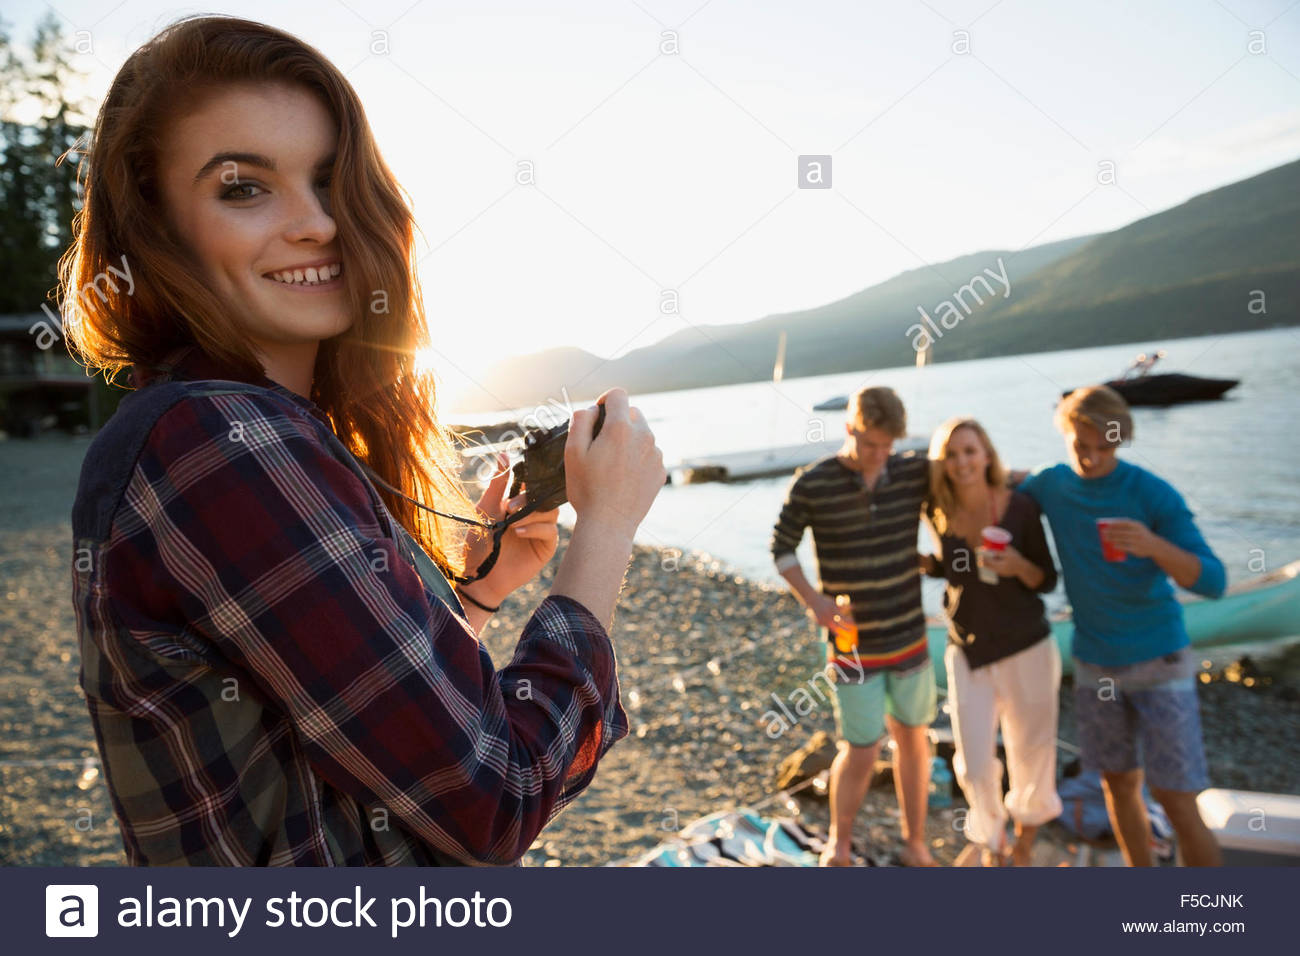 Portrait smiling young woman with friends at lakeside Stock Photo